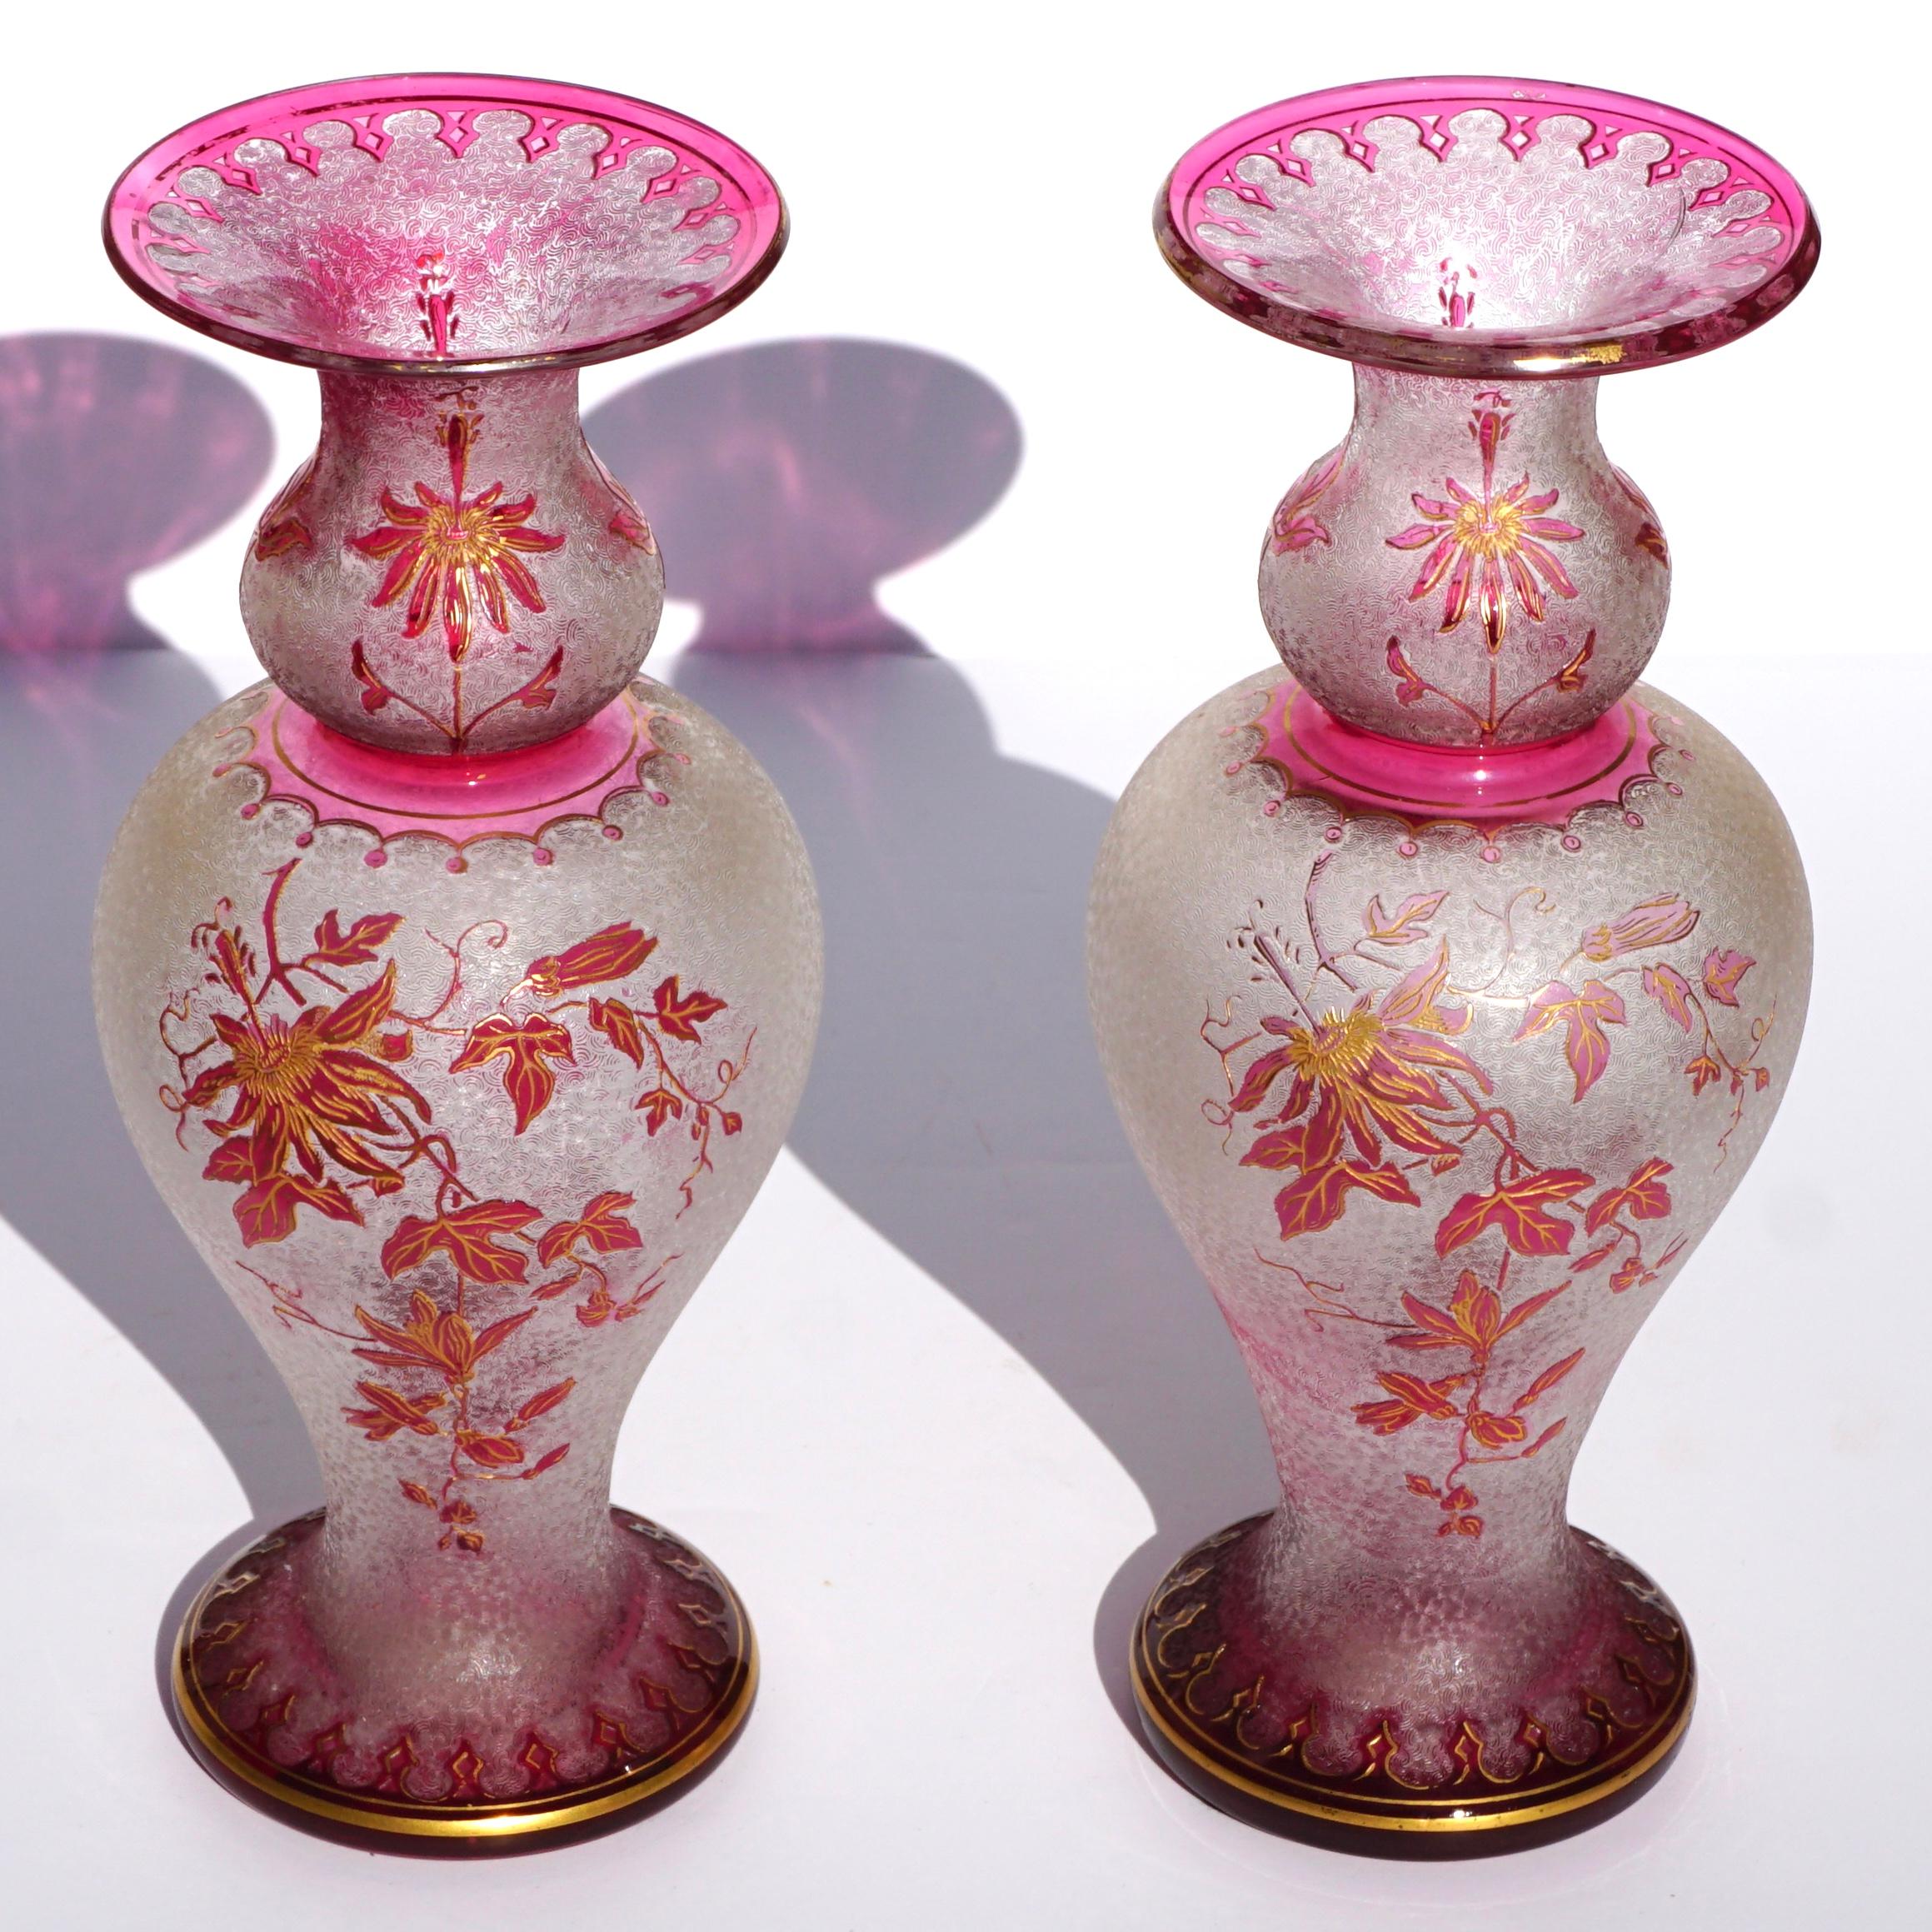 A stunning and gorgeous pair of St. Louis French Cameo and enameled Art Nouveau vases

Dimensions: 10.75 inches tall x 4.6 inches wide,

Clear acid cut background with cranberry red cameo carved overlay, floral enameled with gold stencil